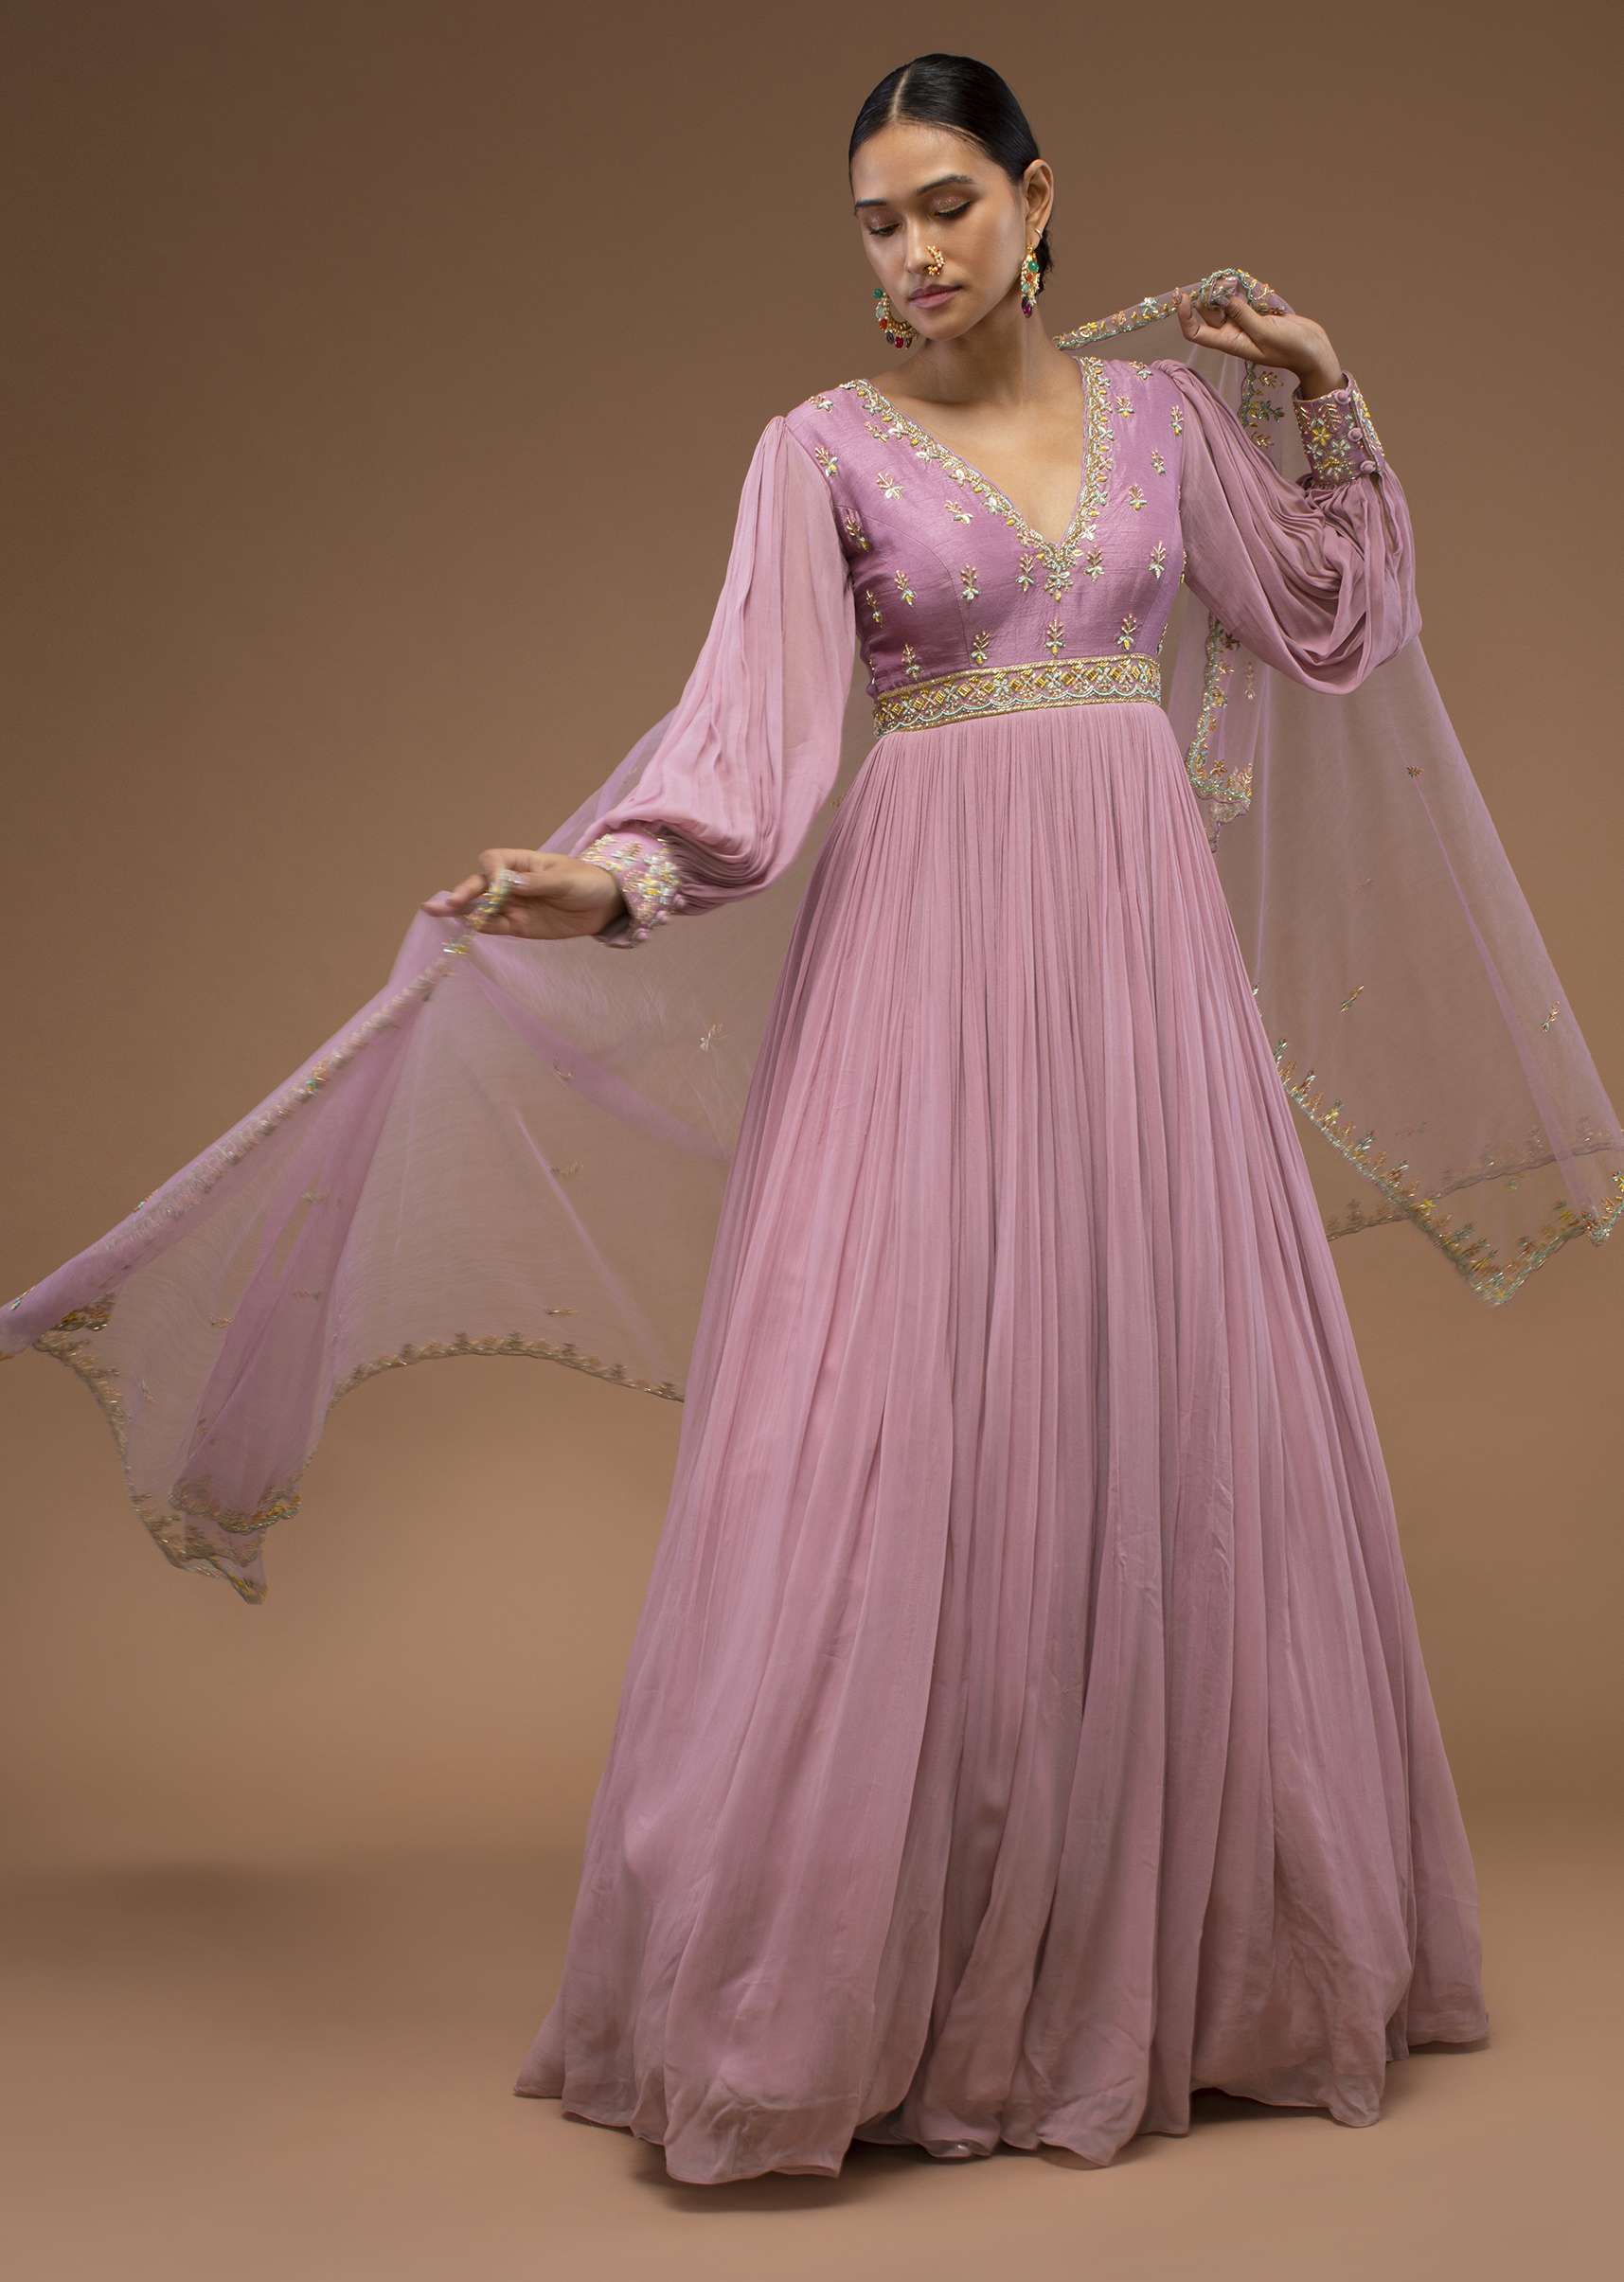 Lilas Pink Floor-Length Suit In Balloon Sleeves, Crafted In Georgette With A Scalloped Neckline And Moti, Cut Dana Embroidery On The Yoke